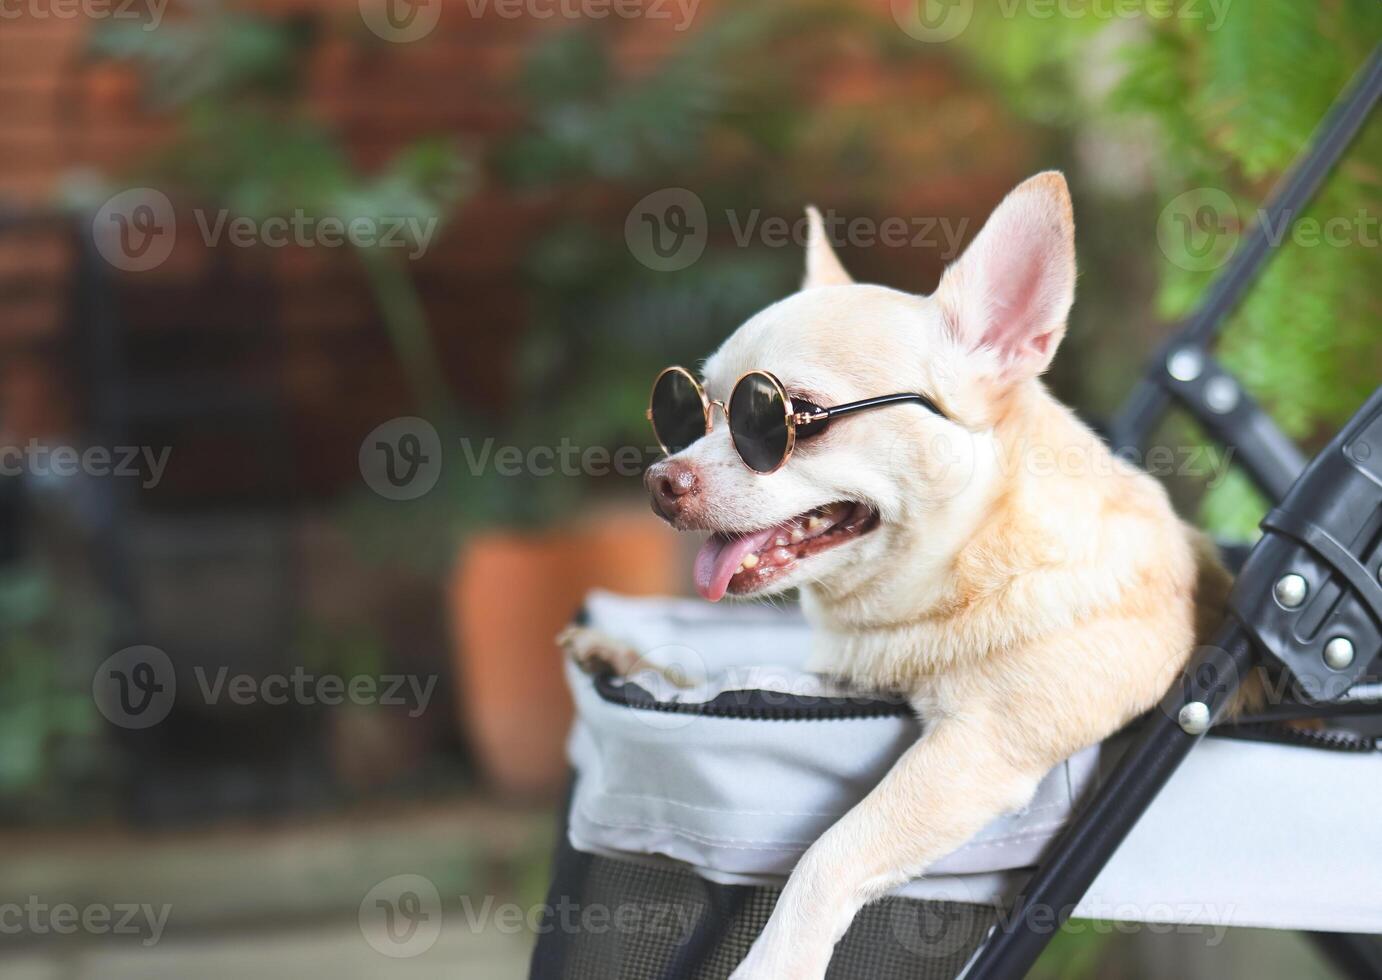 brown short hair chihuahua dog wearing sunglasses,  standing in pet stroller in the garden  with green plant background. Smiling happily. photo